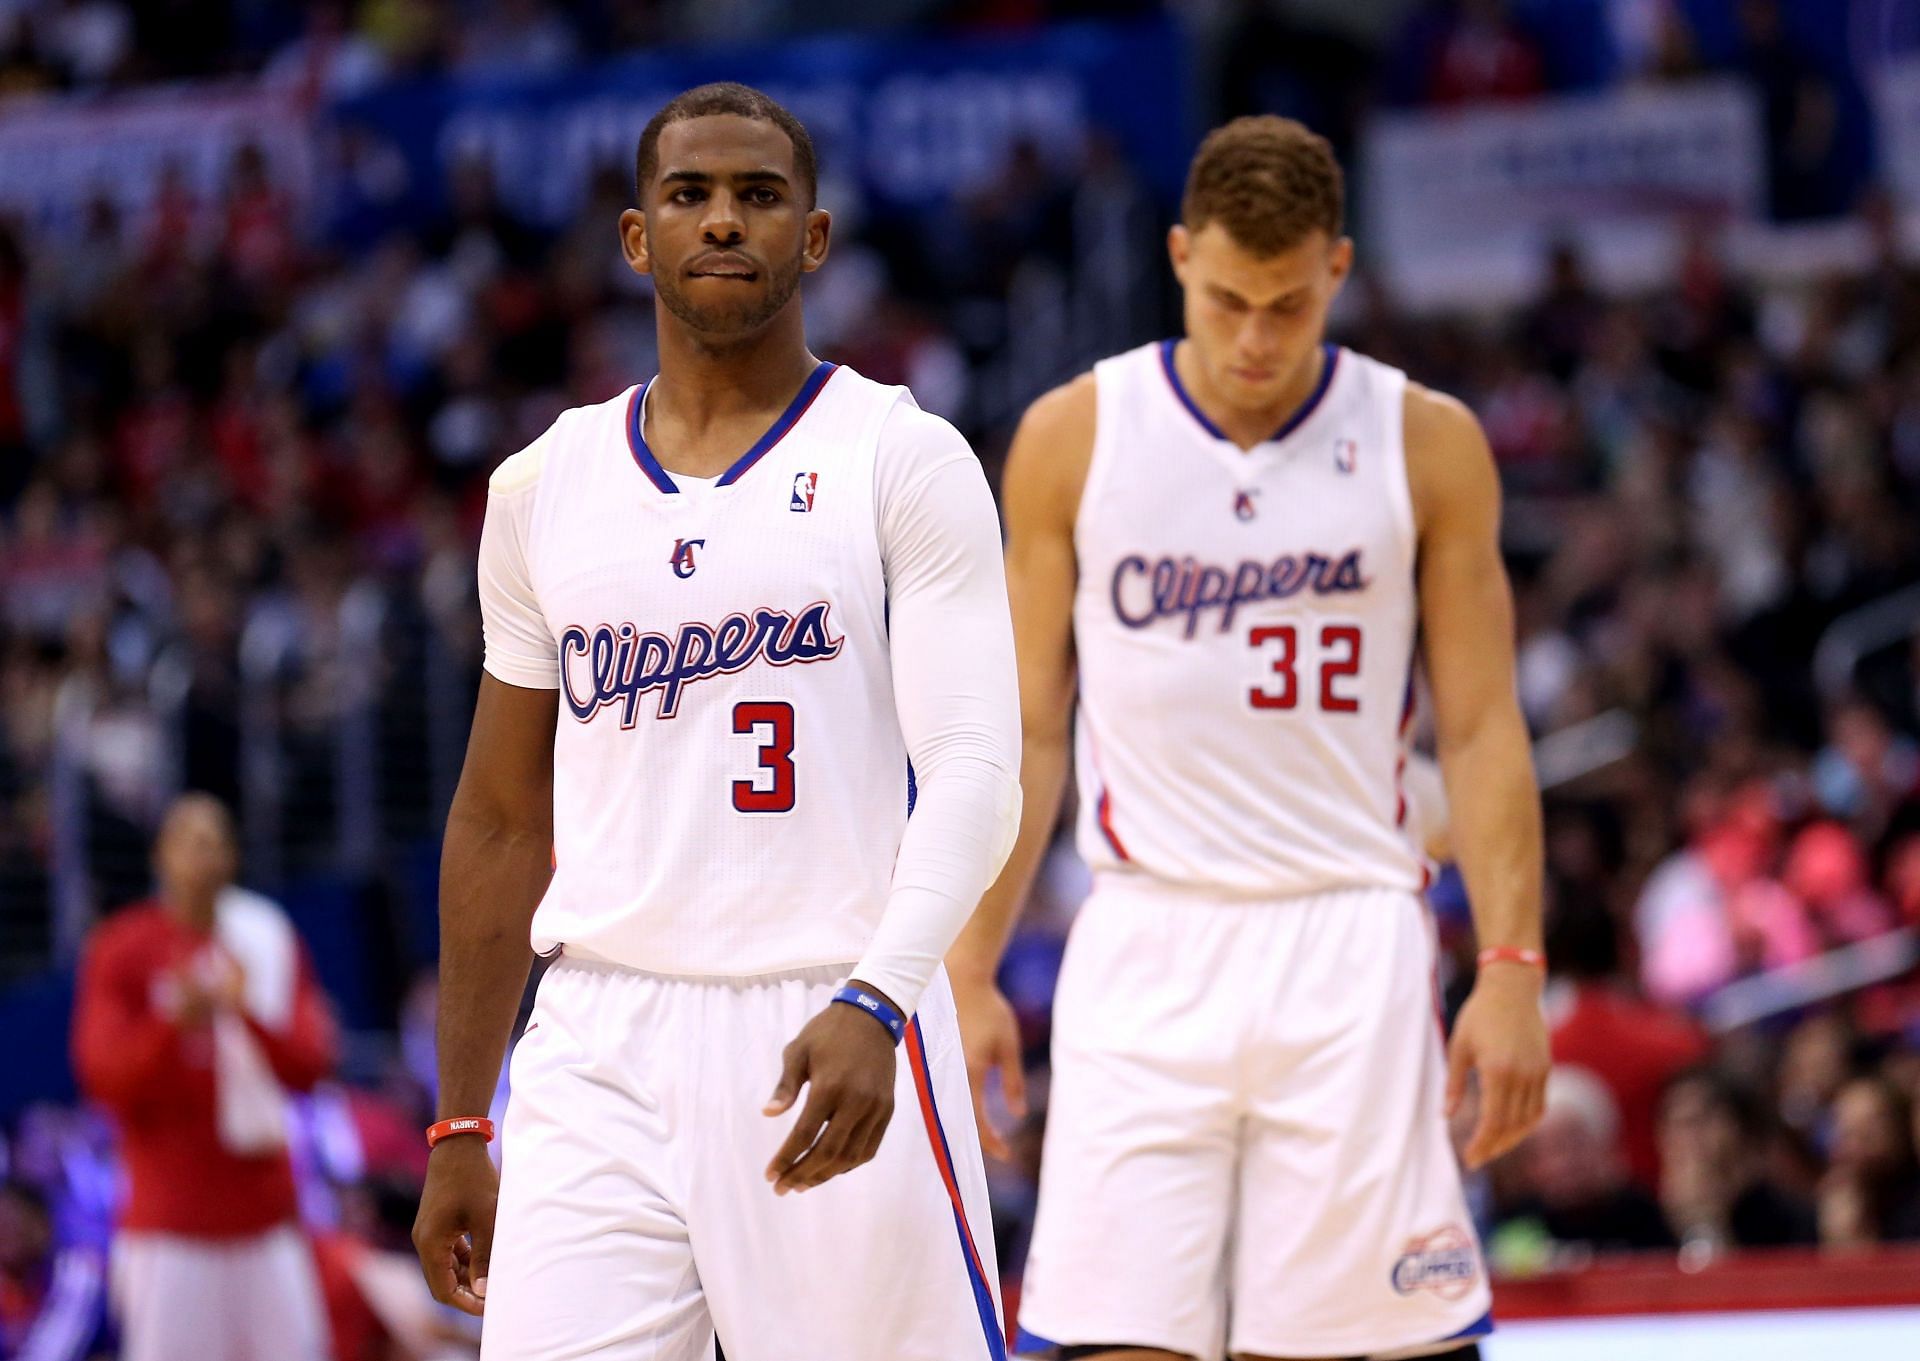 Chris Paul and Blake Griffin played together for the Clippers